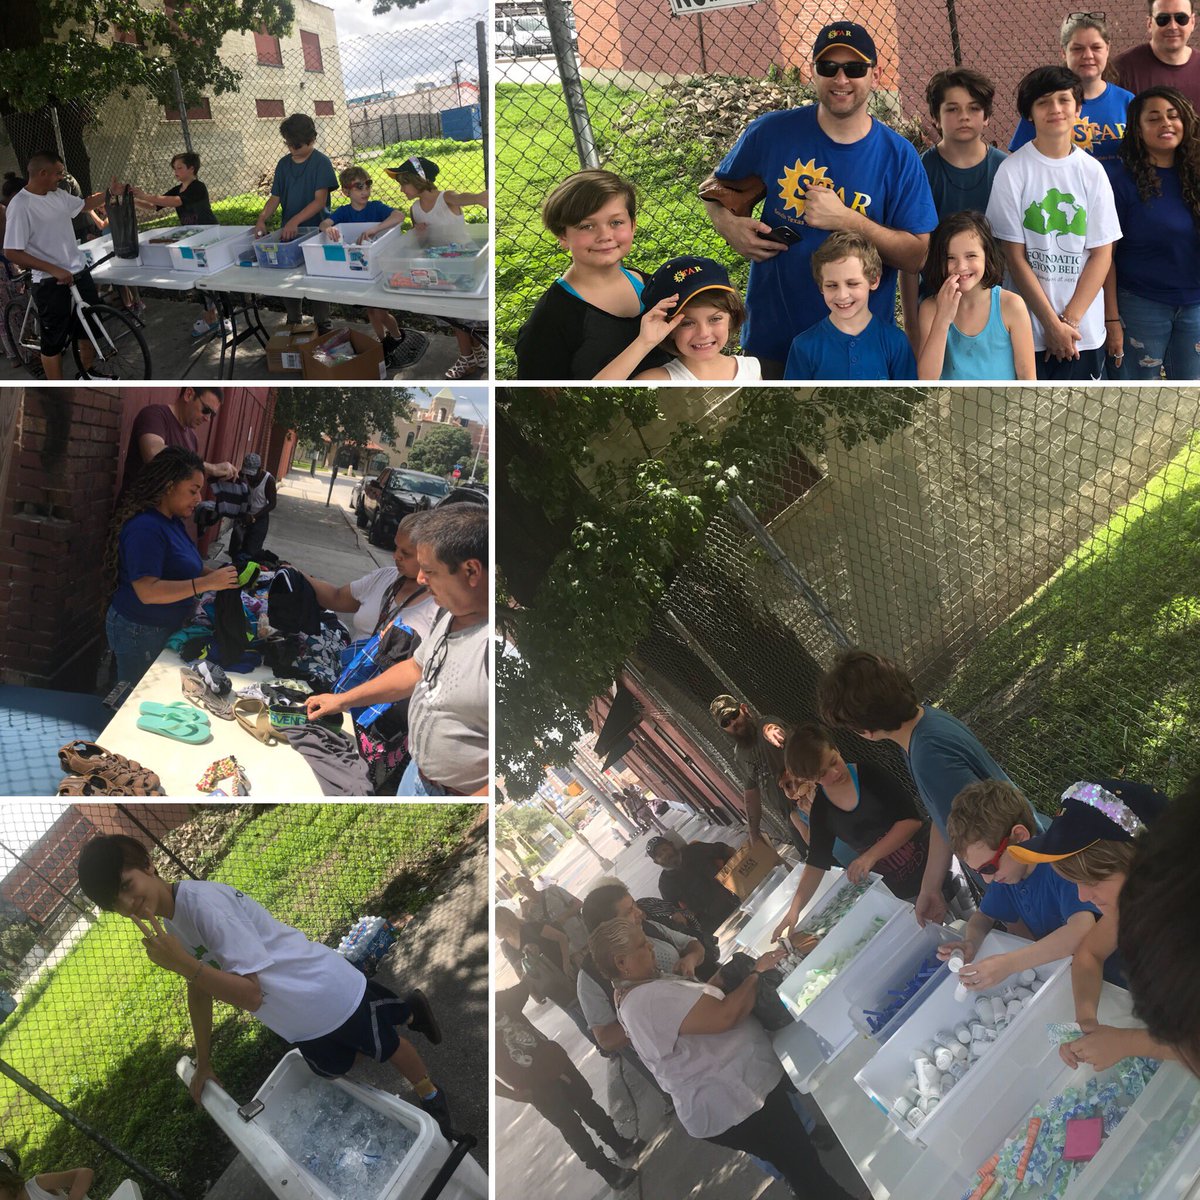 Our monthly helping the homeless event! Last Sunday of the month at 1:30pm on the corner of Frio and West Houston #helpingfriendsandneighbors #atheistsatwork #hygeinesupplies #water #snacks #clothingitems #communityservice #kiddoshelpingtheircommunity